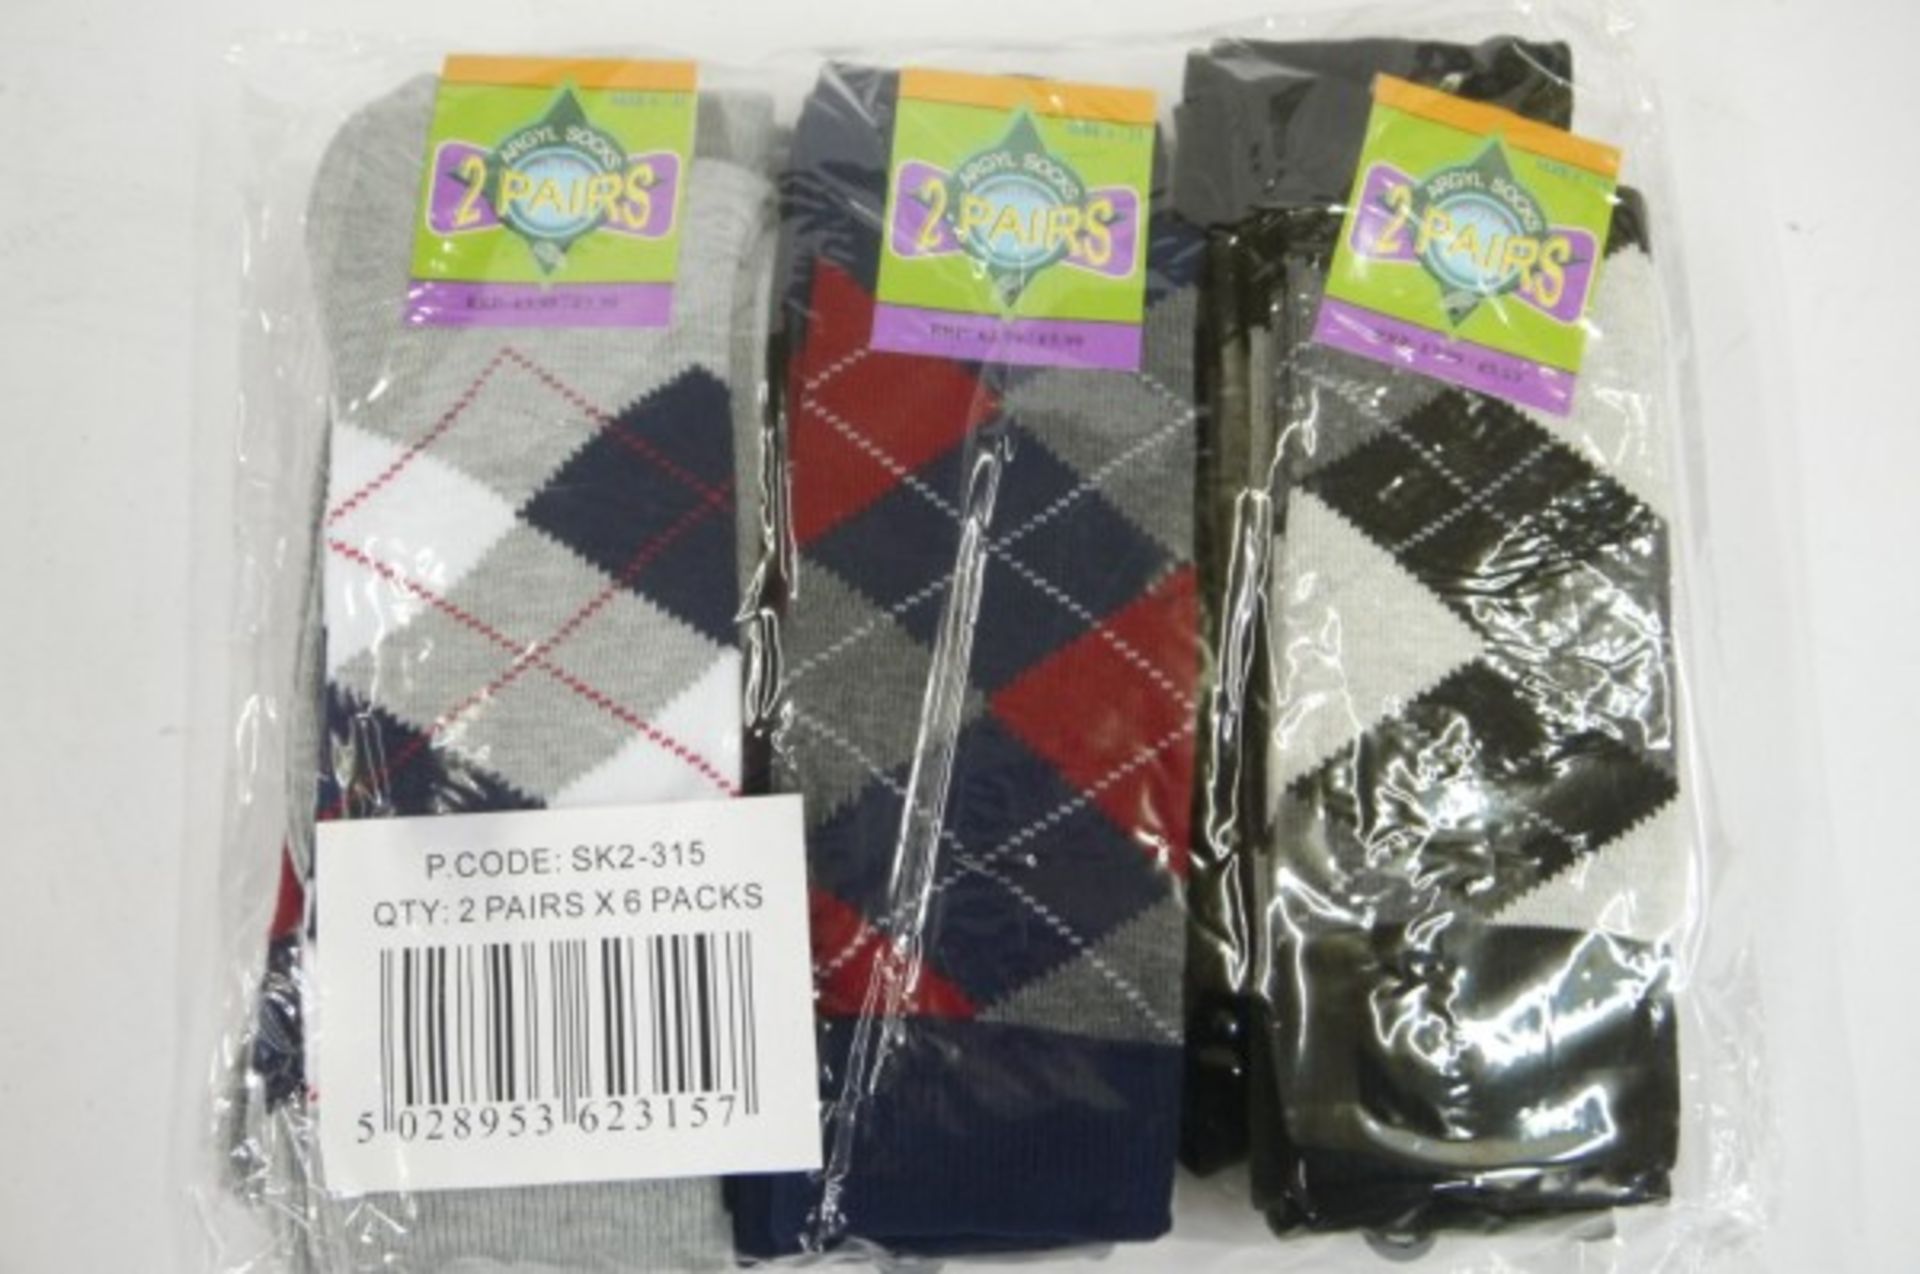 V *TRADE QTY* Brand New 12 Pairs Of Argyle Socks X 3 YOUR BID PRICE TO BE MULTIPLIED BY THREE